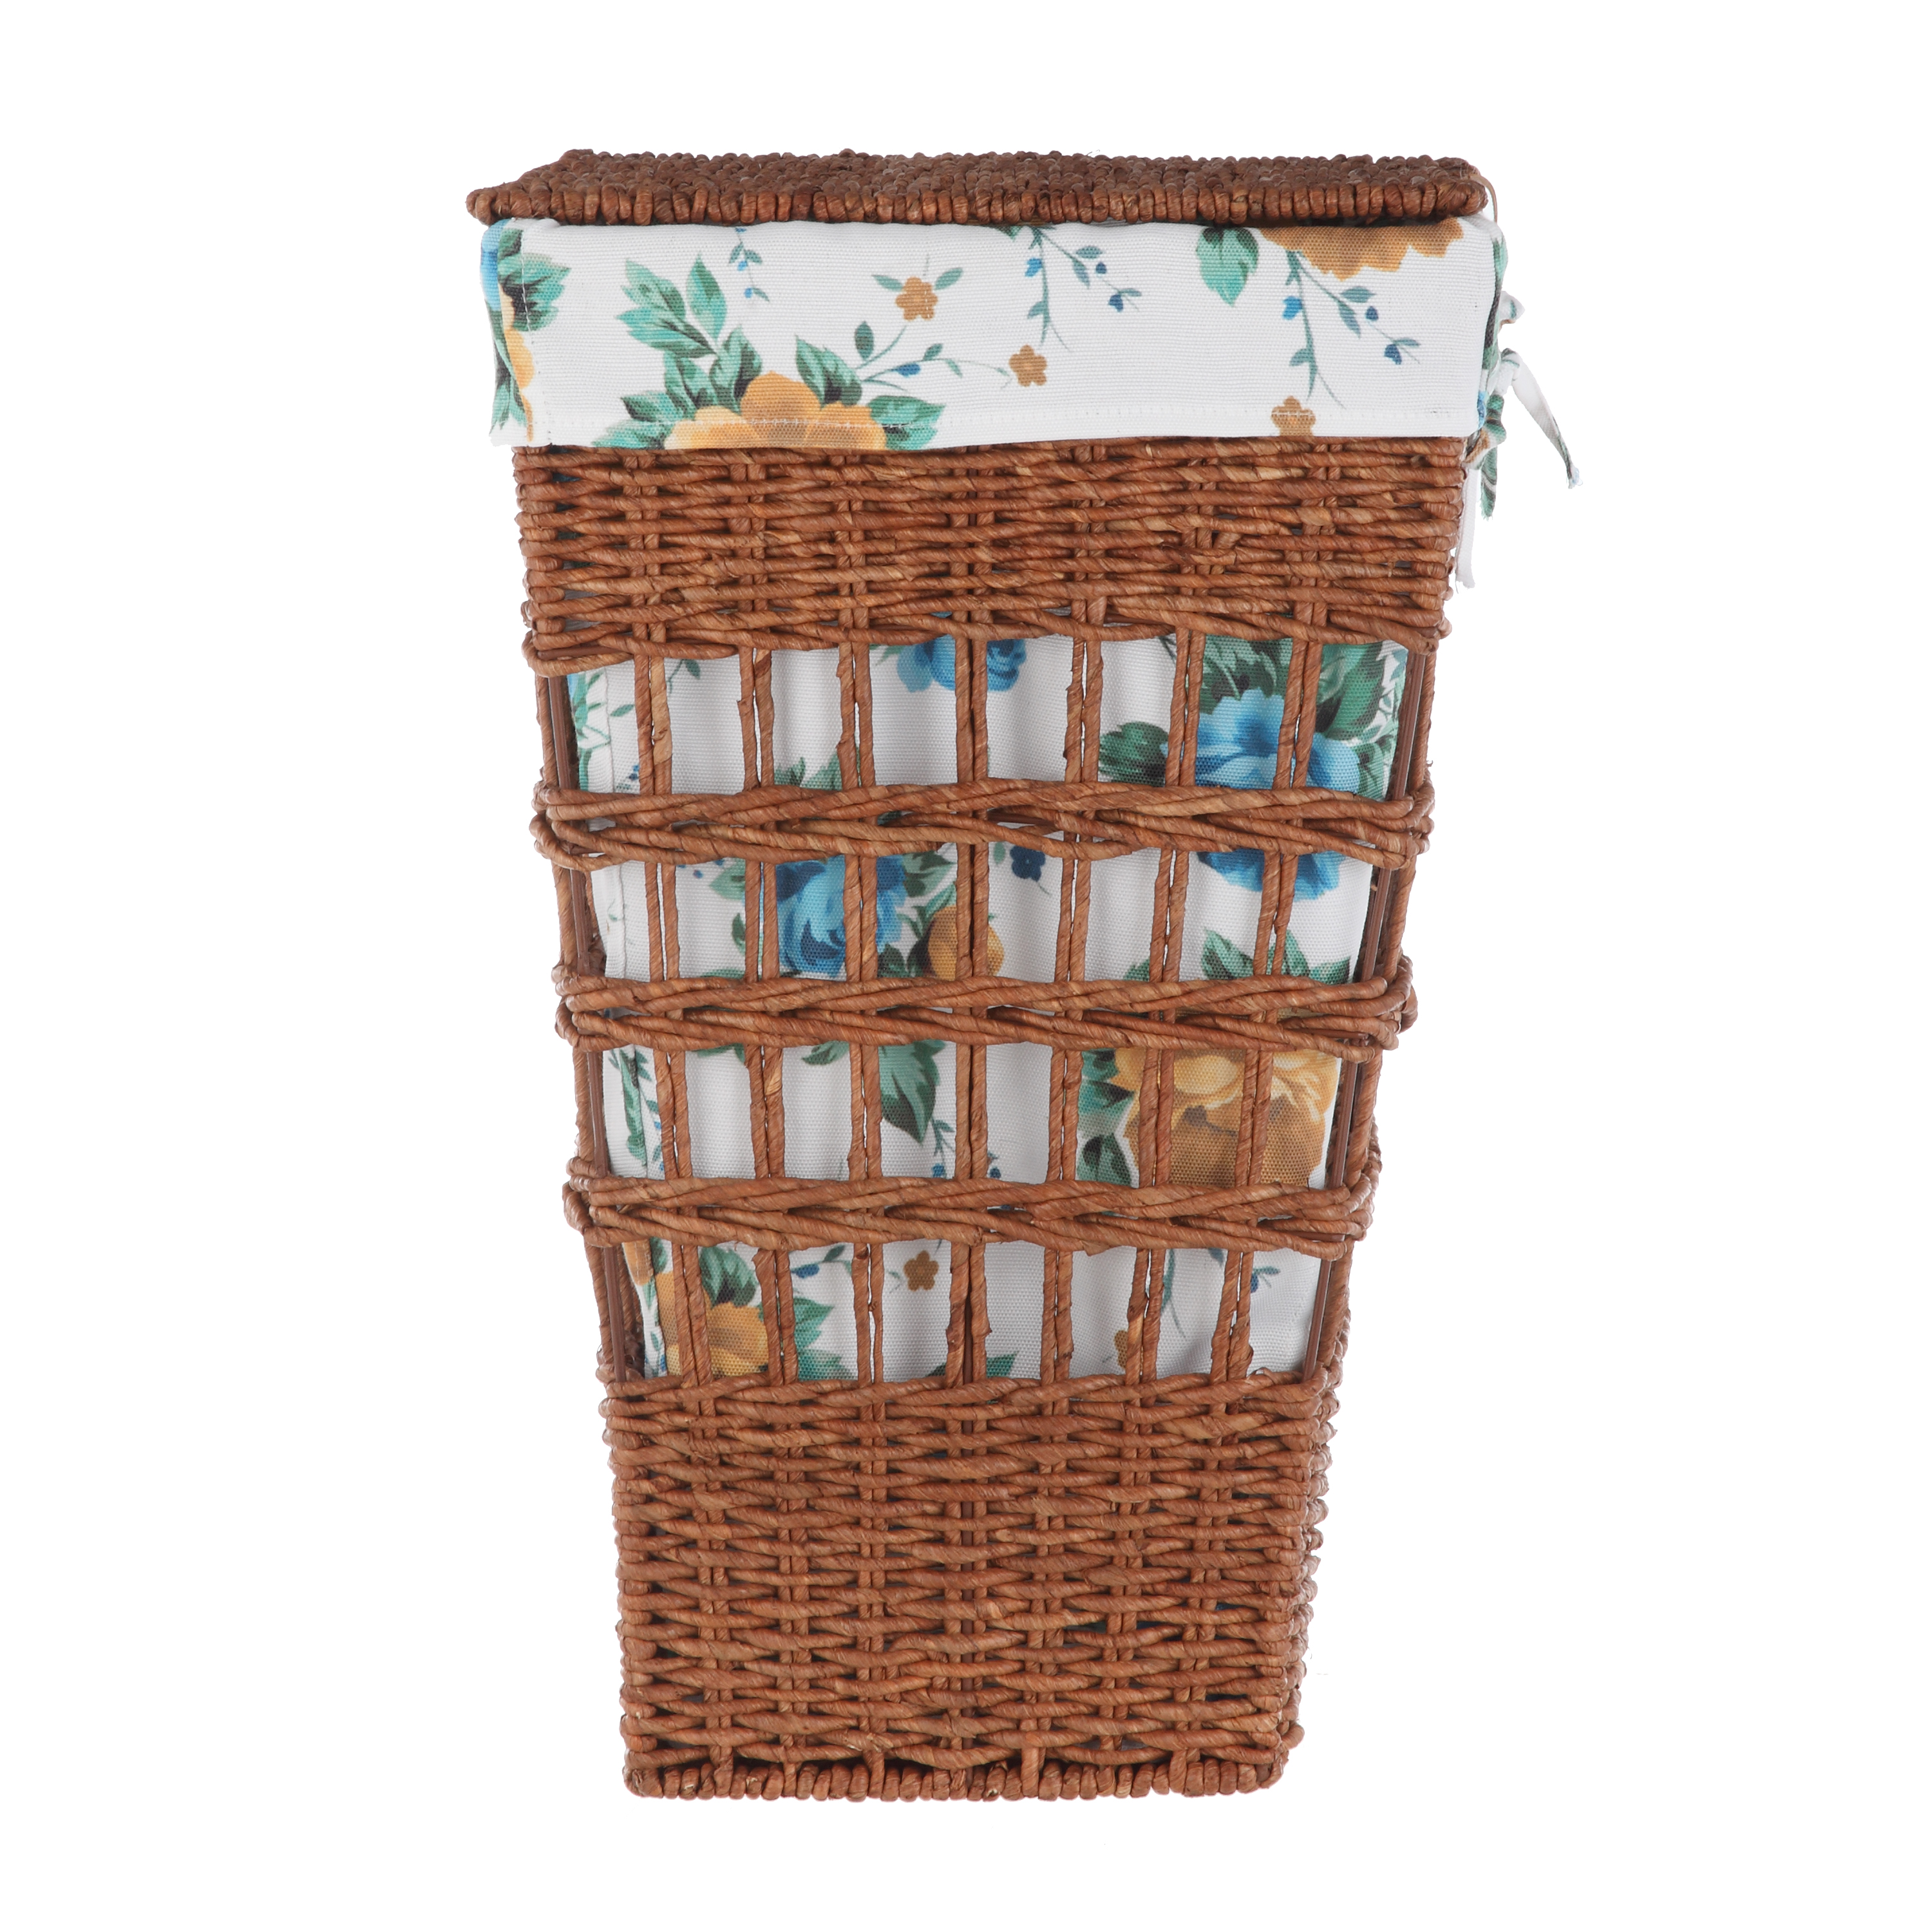 The Pioneer Woman Rose Shadow Maize Laundry Hamper - image 5 of 6